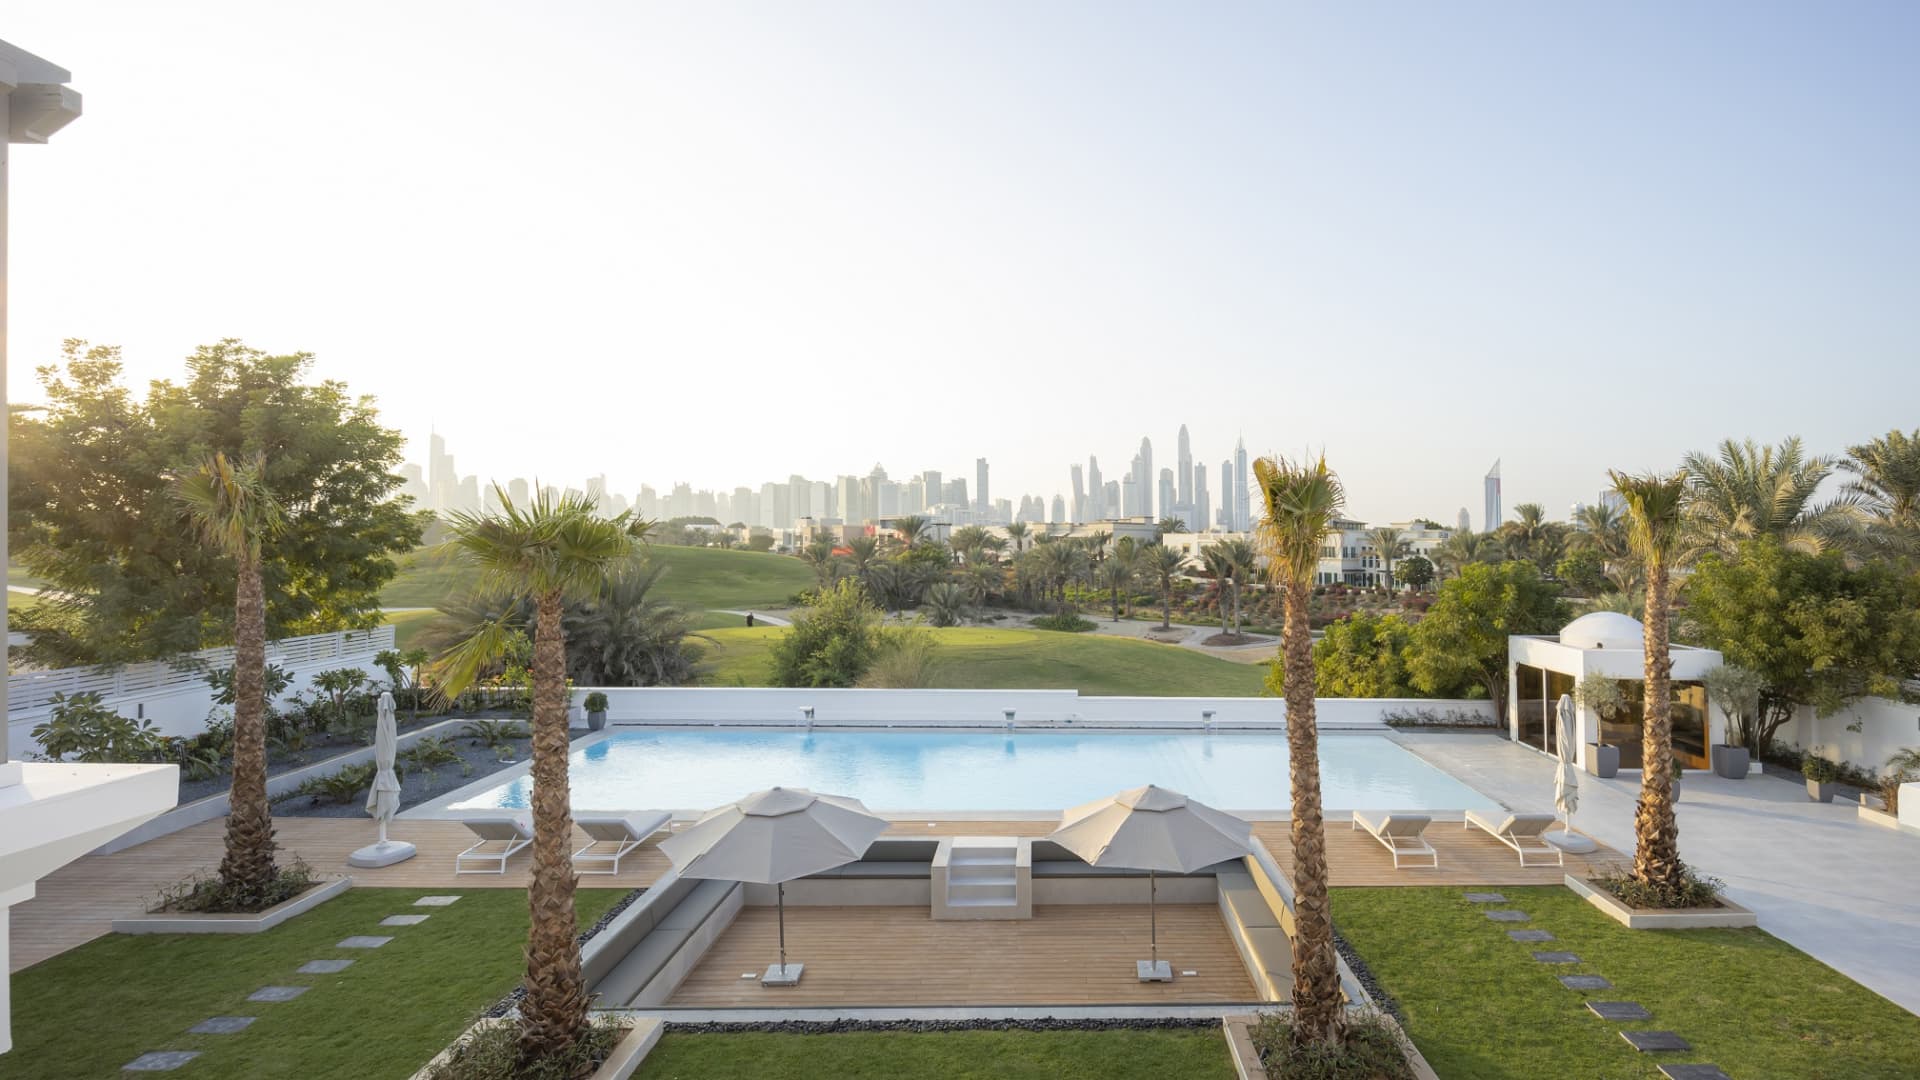 Swanky vacation rentals across the Middle East look to capitalize on ‘revenge tourism’ trend – CNBC